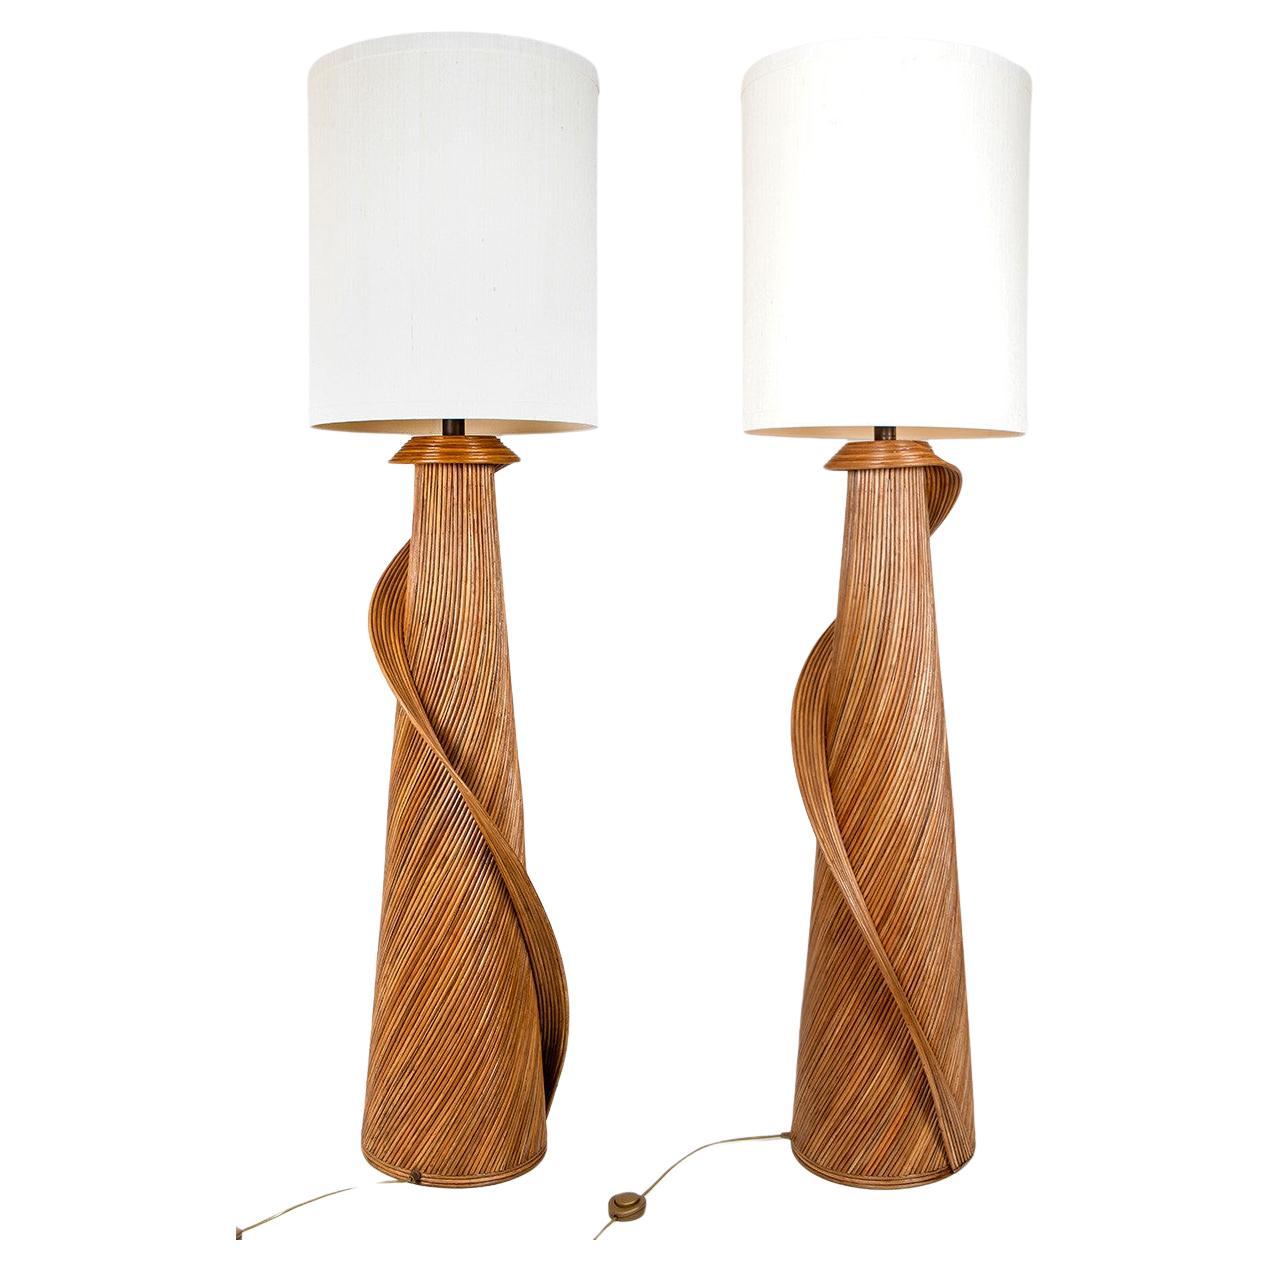 1 of the 2 Eco-friendly Large Rattan Floor Lamps by René Houben